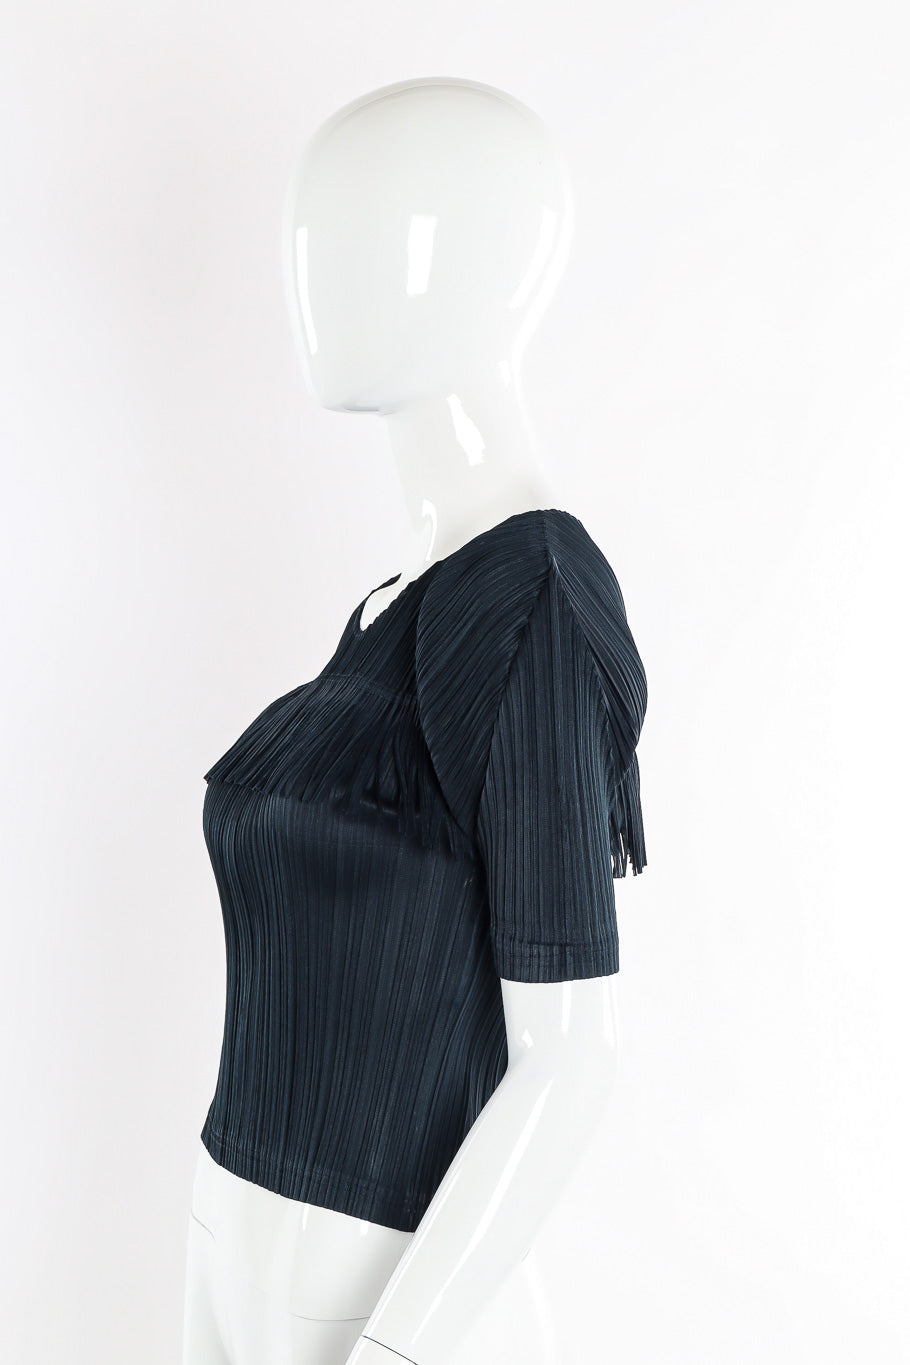 accordion pleat fringe top by Issey Miyake for Pleats Please mannequin side @recessla